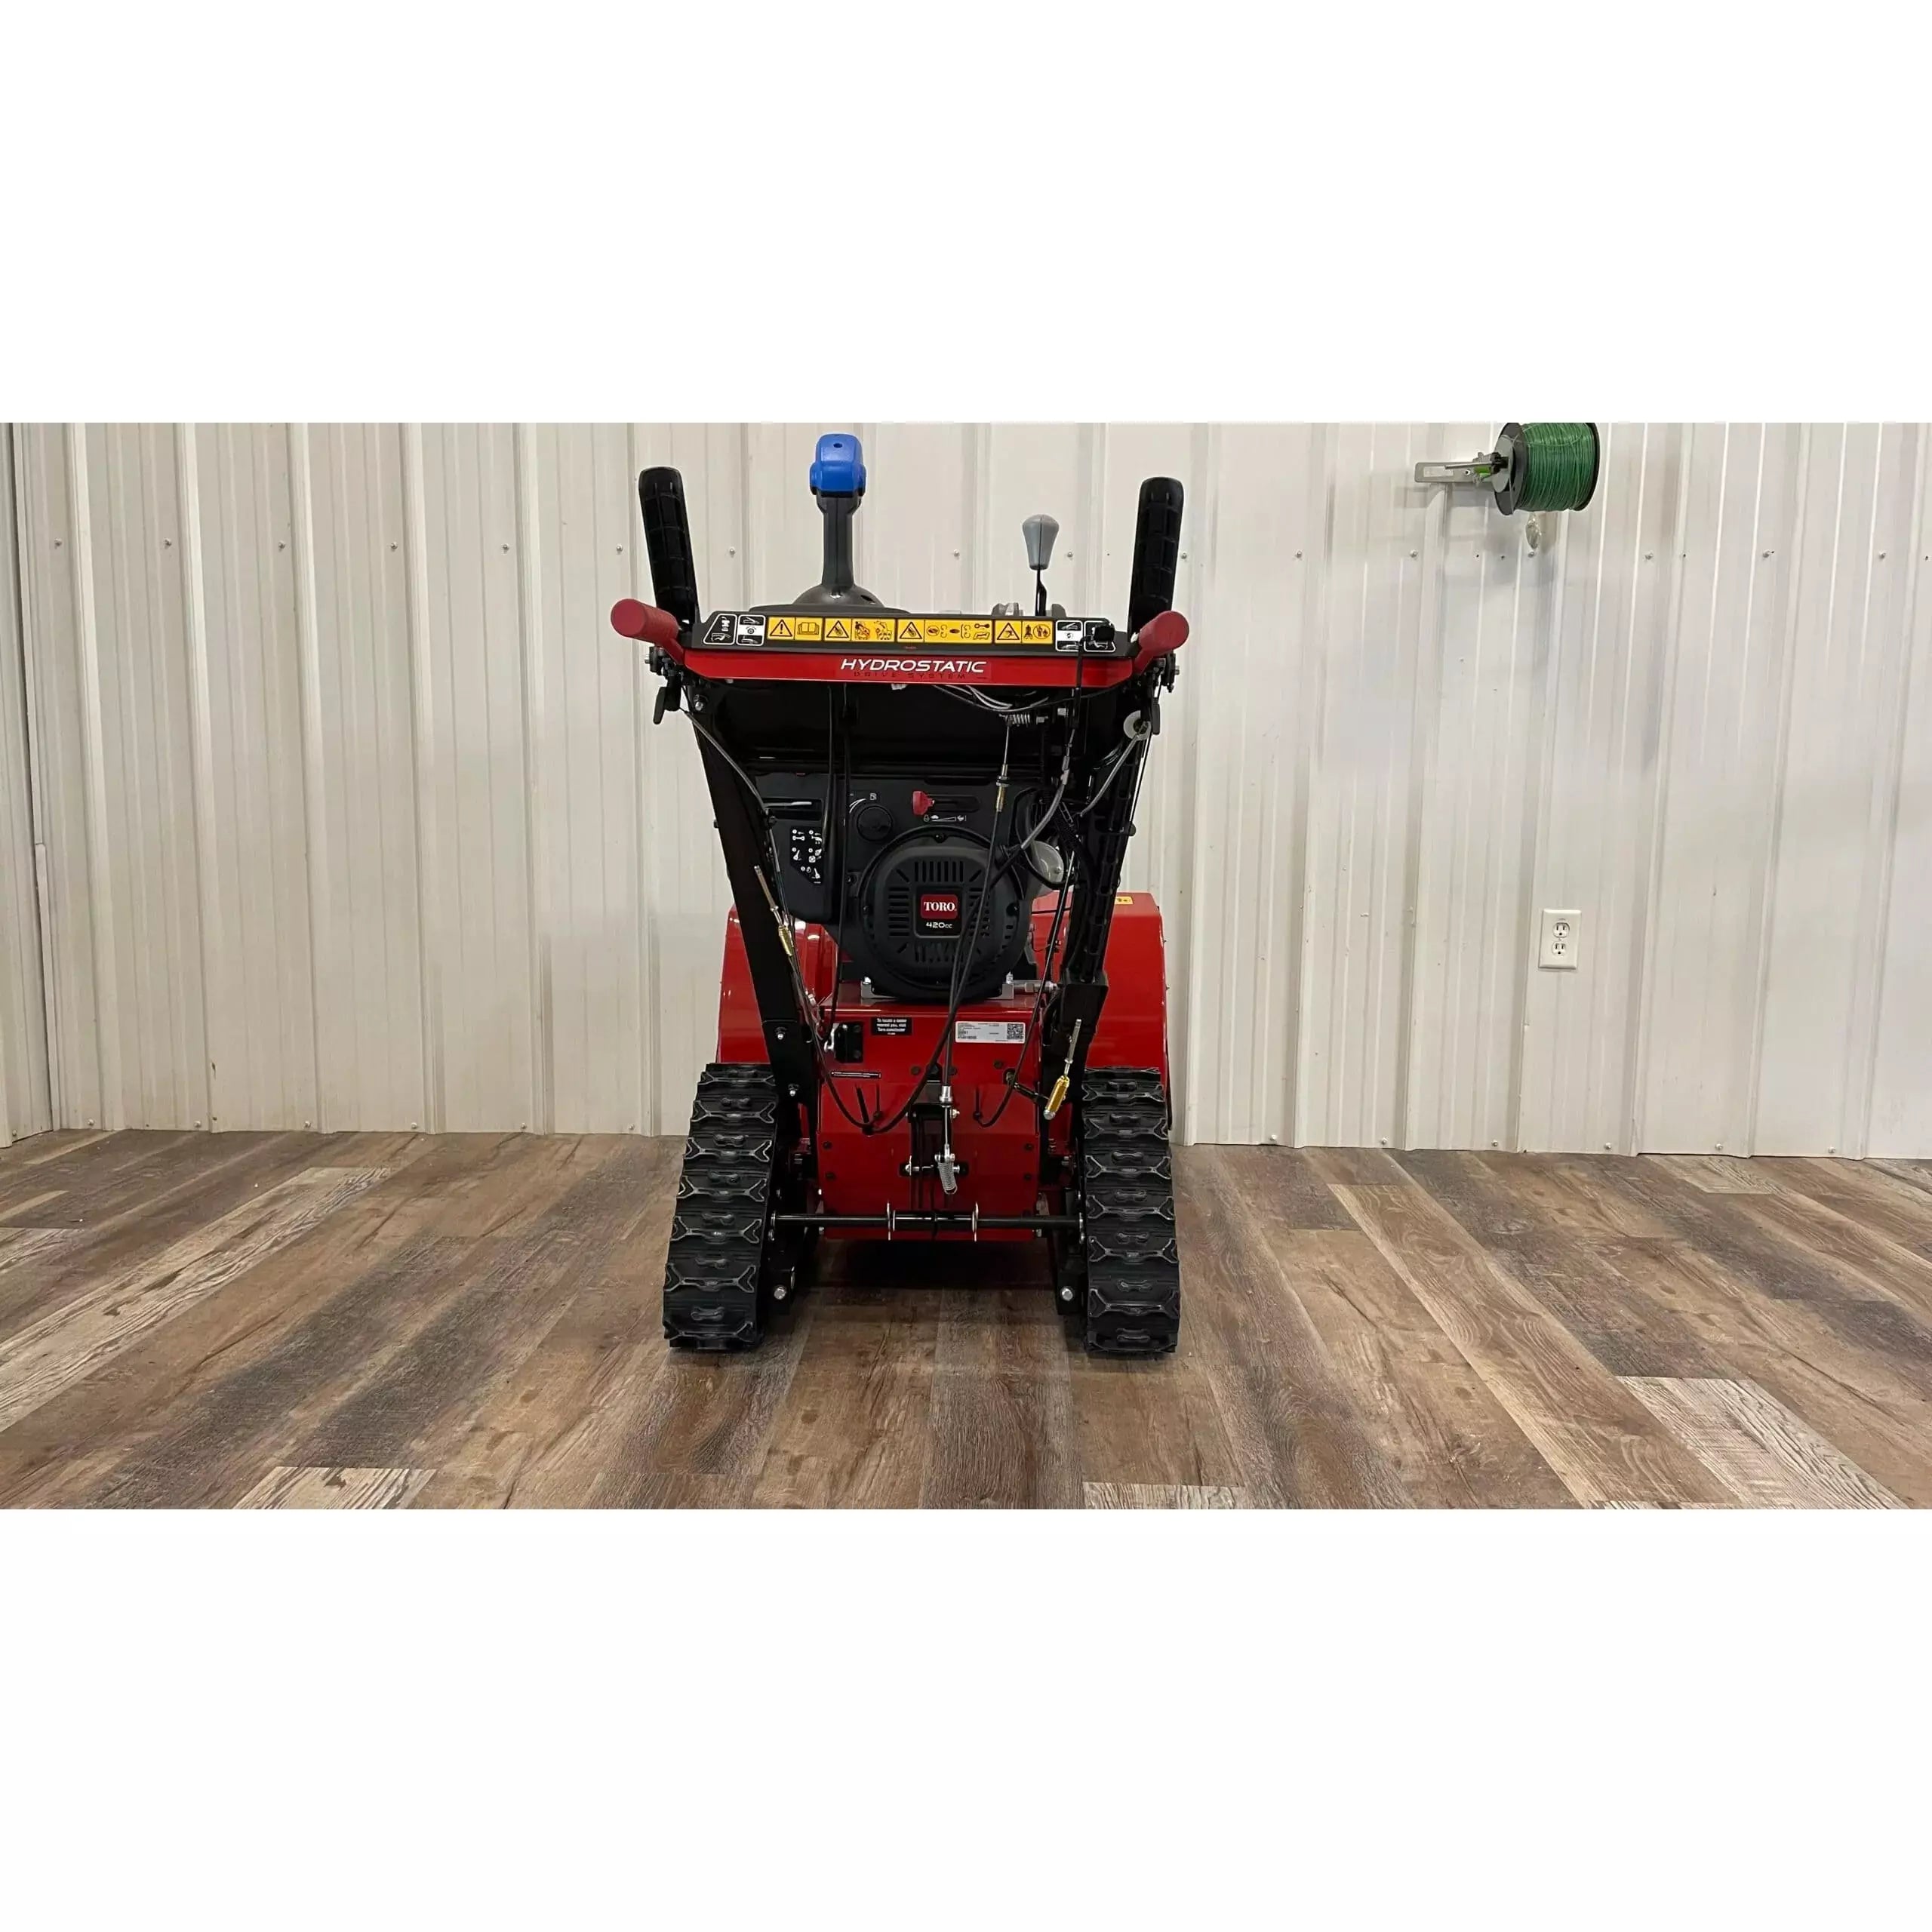 32" Power TRX HD 1432 OHXE Commercial Two-Stage Gas Snow Blower